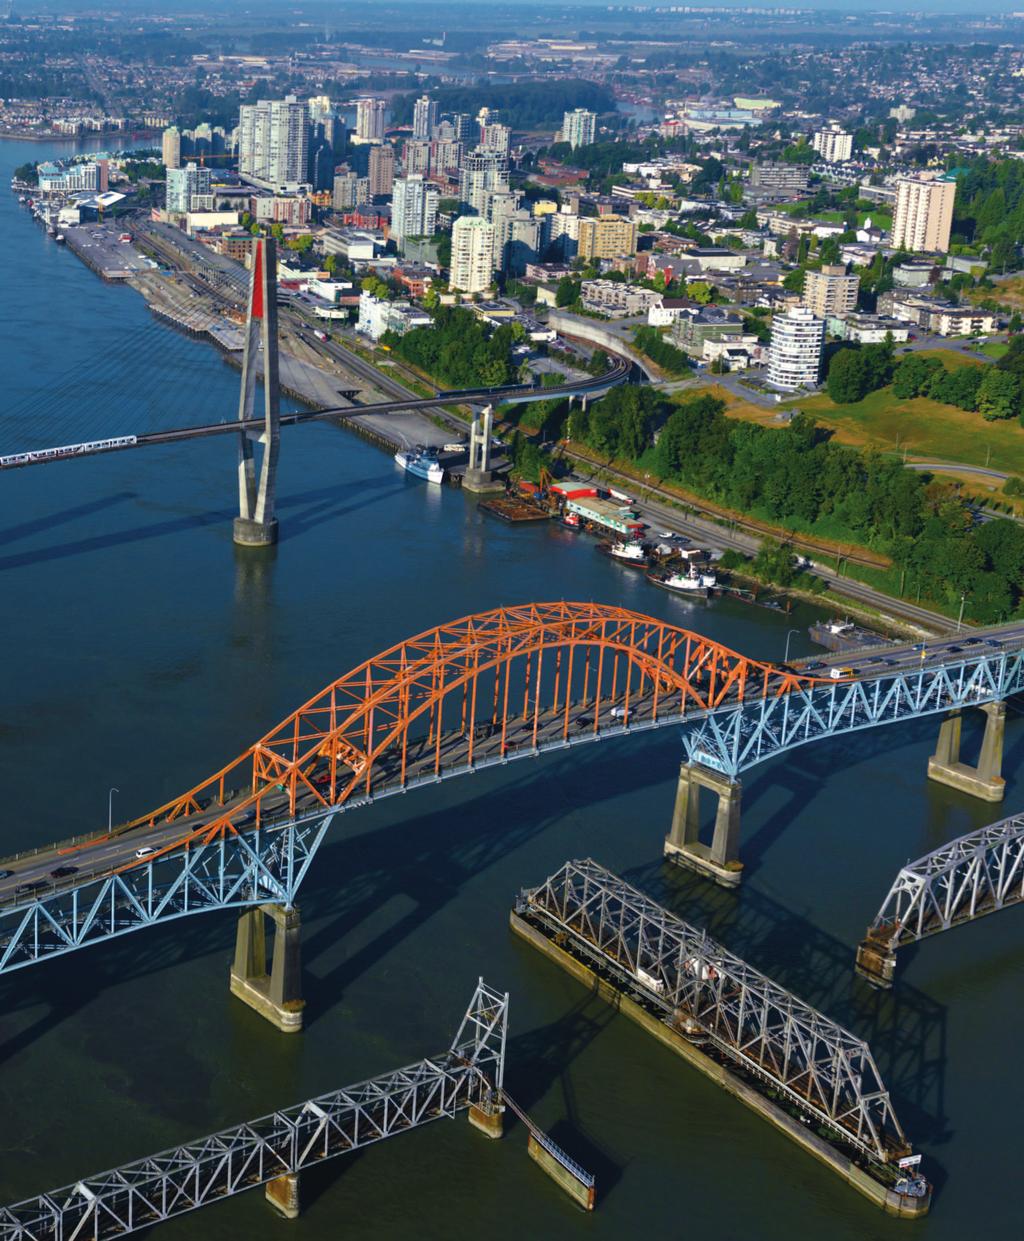 Pattullo Bridge Overview This document will: Explain the challenges facing